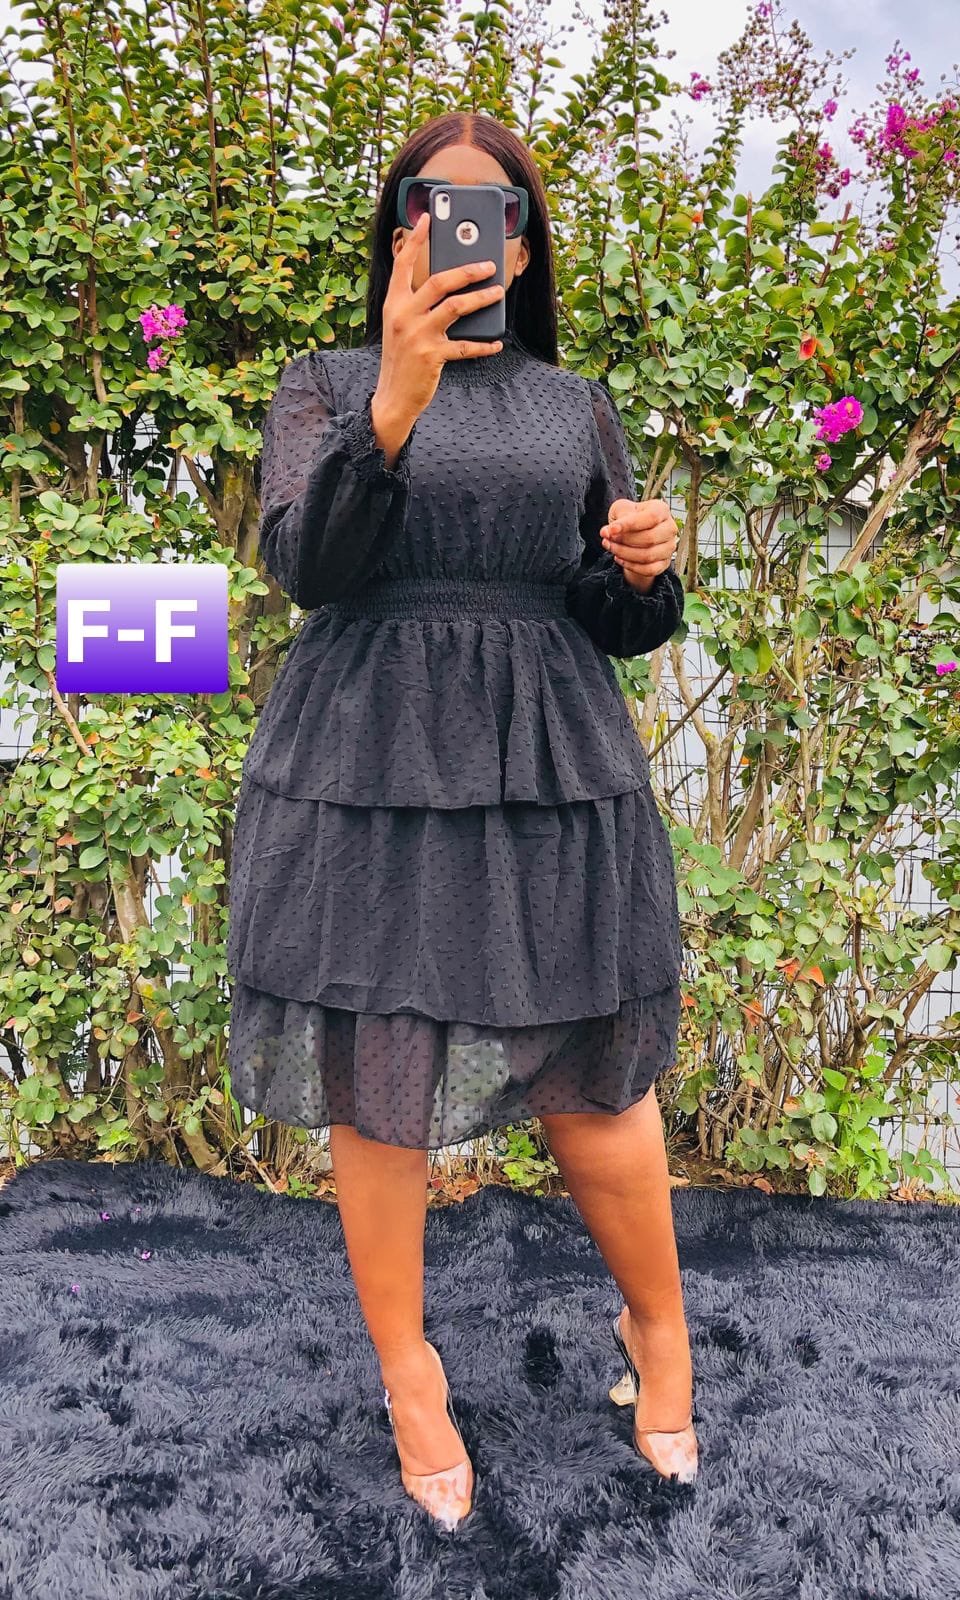 Thando Your fashion lady on Twitter: "ORDER THESE CONFORTABLE DRESSES FOR each FROM Sizes S-2XL 📦PEP PAXI NATIONWIDE 🚚Aramex Door to Door DM's ARE OPEN Then we can take it